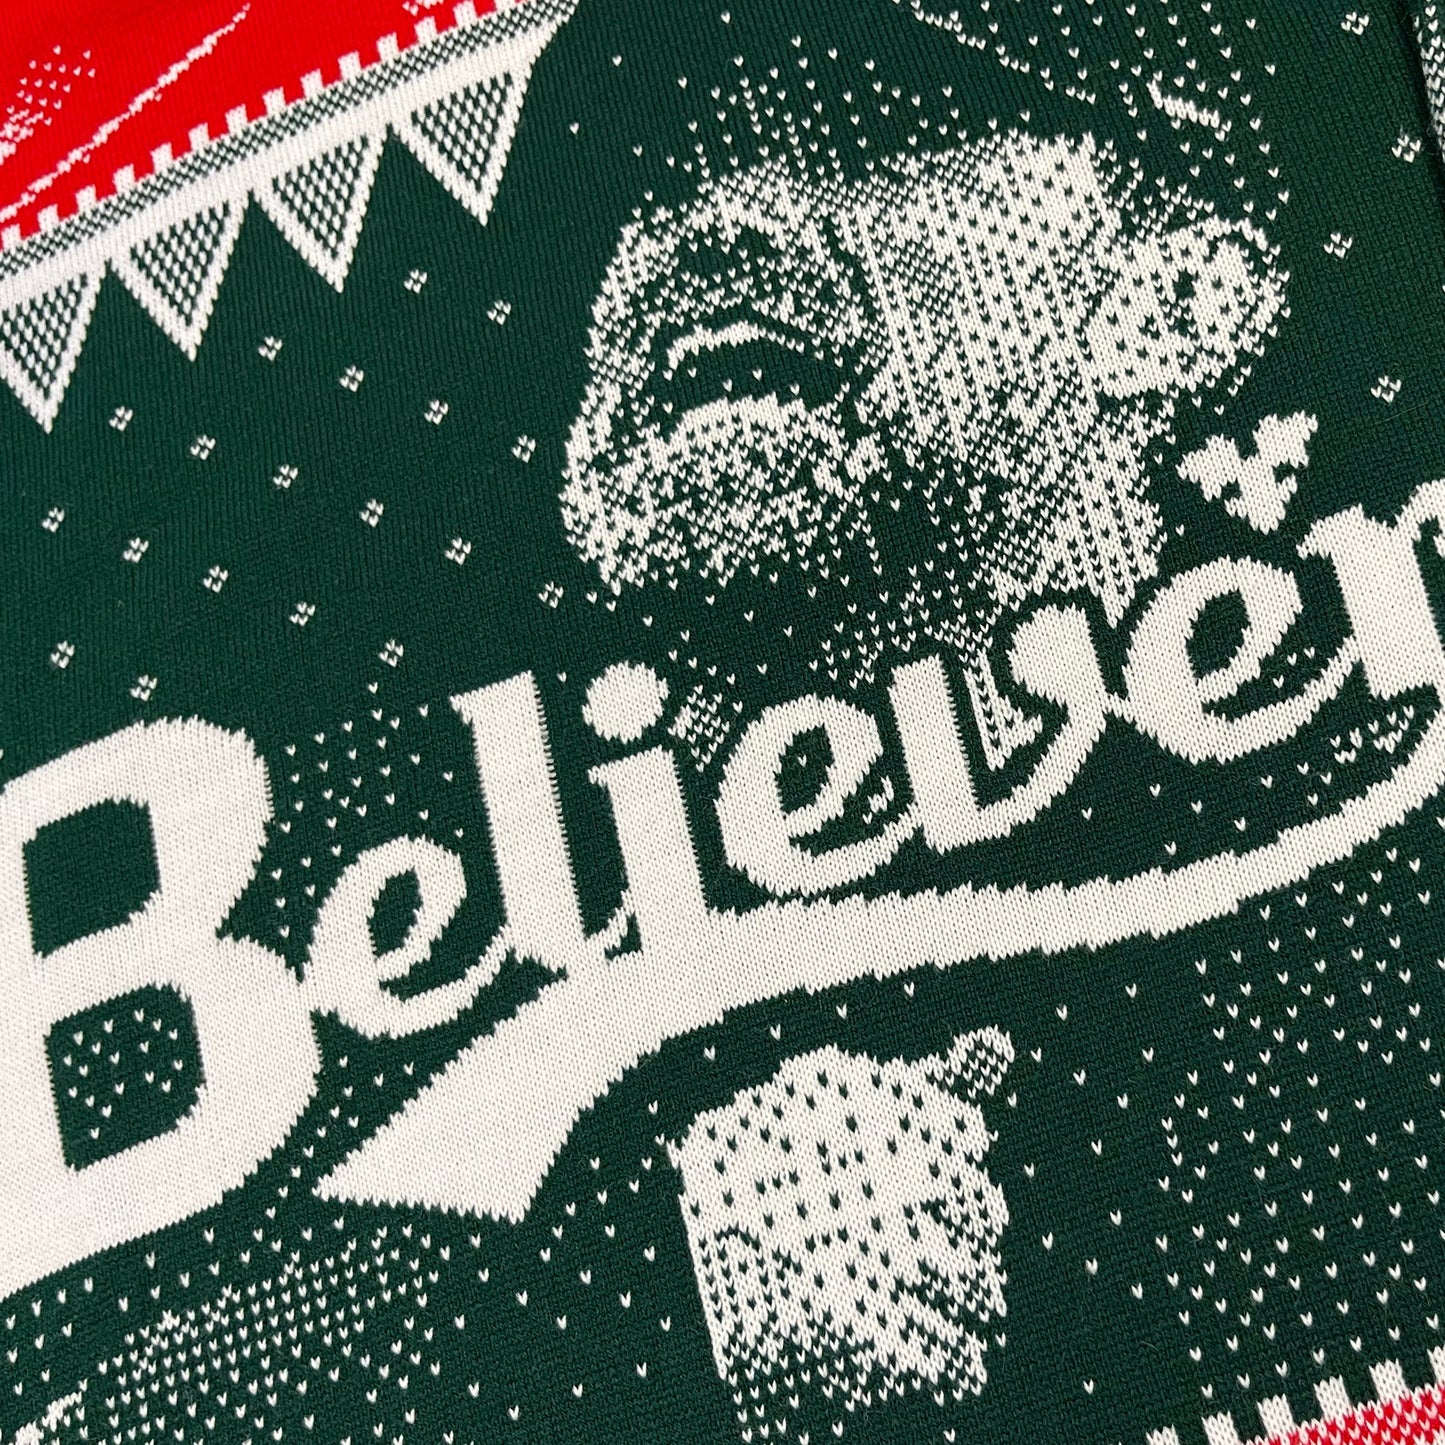 Klopp Believer 2022 Knitted Xmas Jumper | VERY LIMITED STOCK